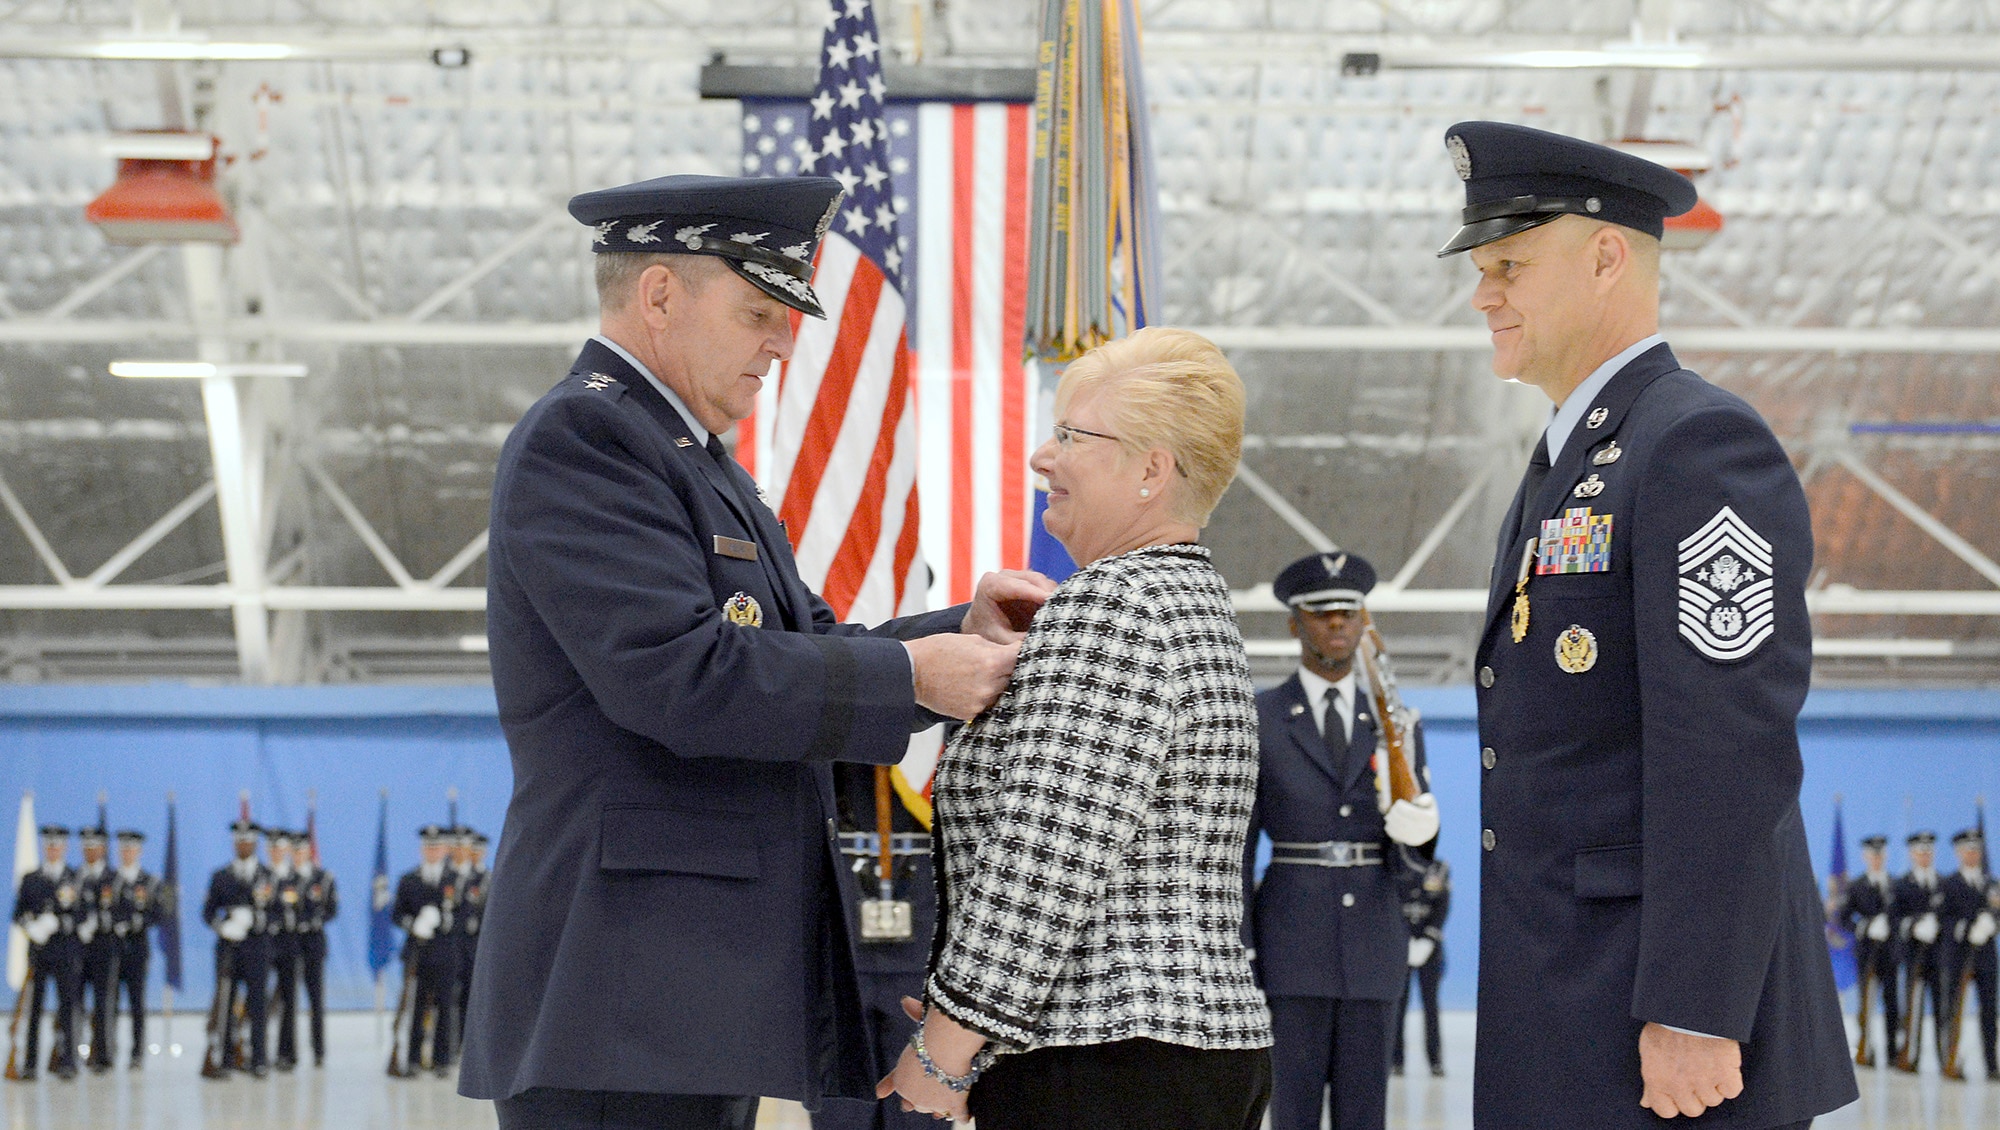 Air Force Chief of Staff Gen. Mark A. Welsh III presents Paula Roy, wife of  Chief Master Sgt. of the Air Force James Roy, the Distinguished Public Service award at Joint Base Andrews, Md., on Jan. 24, 2013, during Roy's retirement ceremony. (U.S. Air Force photo/Scott M. Ash)